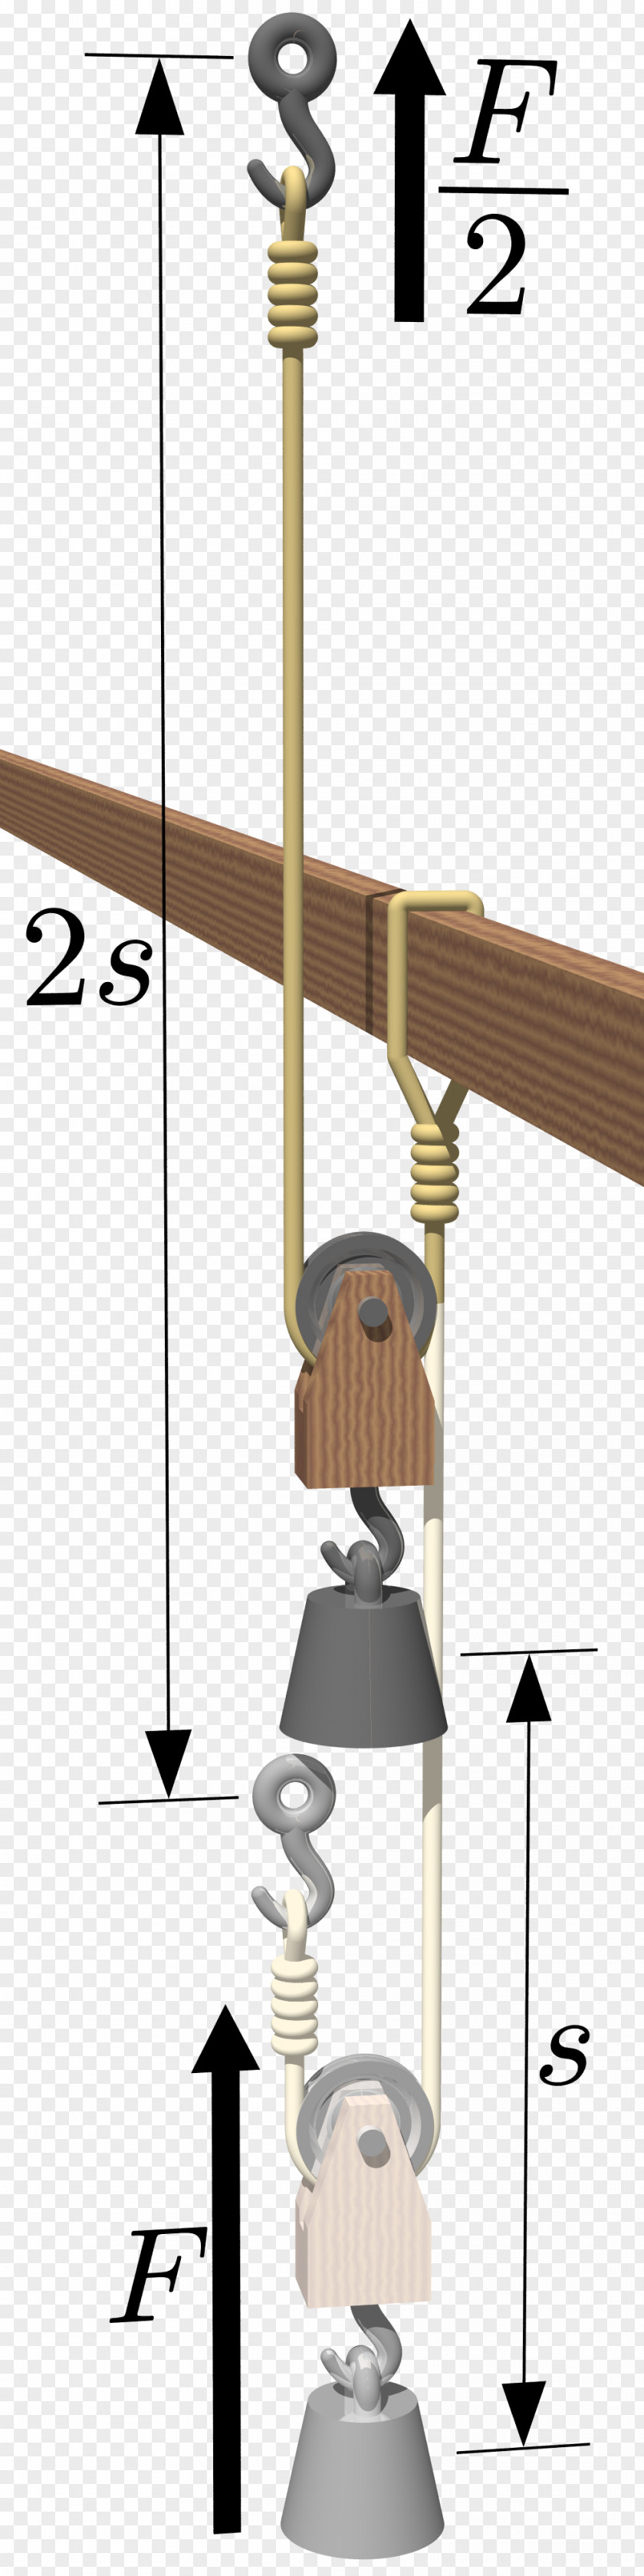 Rope Pulley Force Crane Counterweight PNG